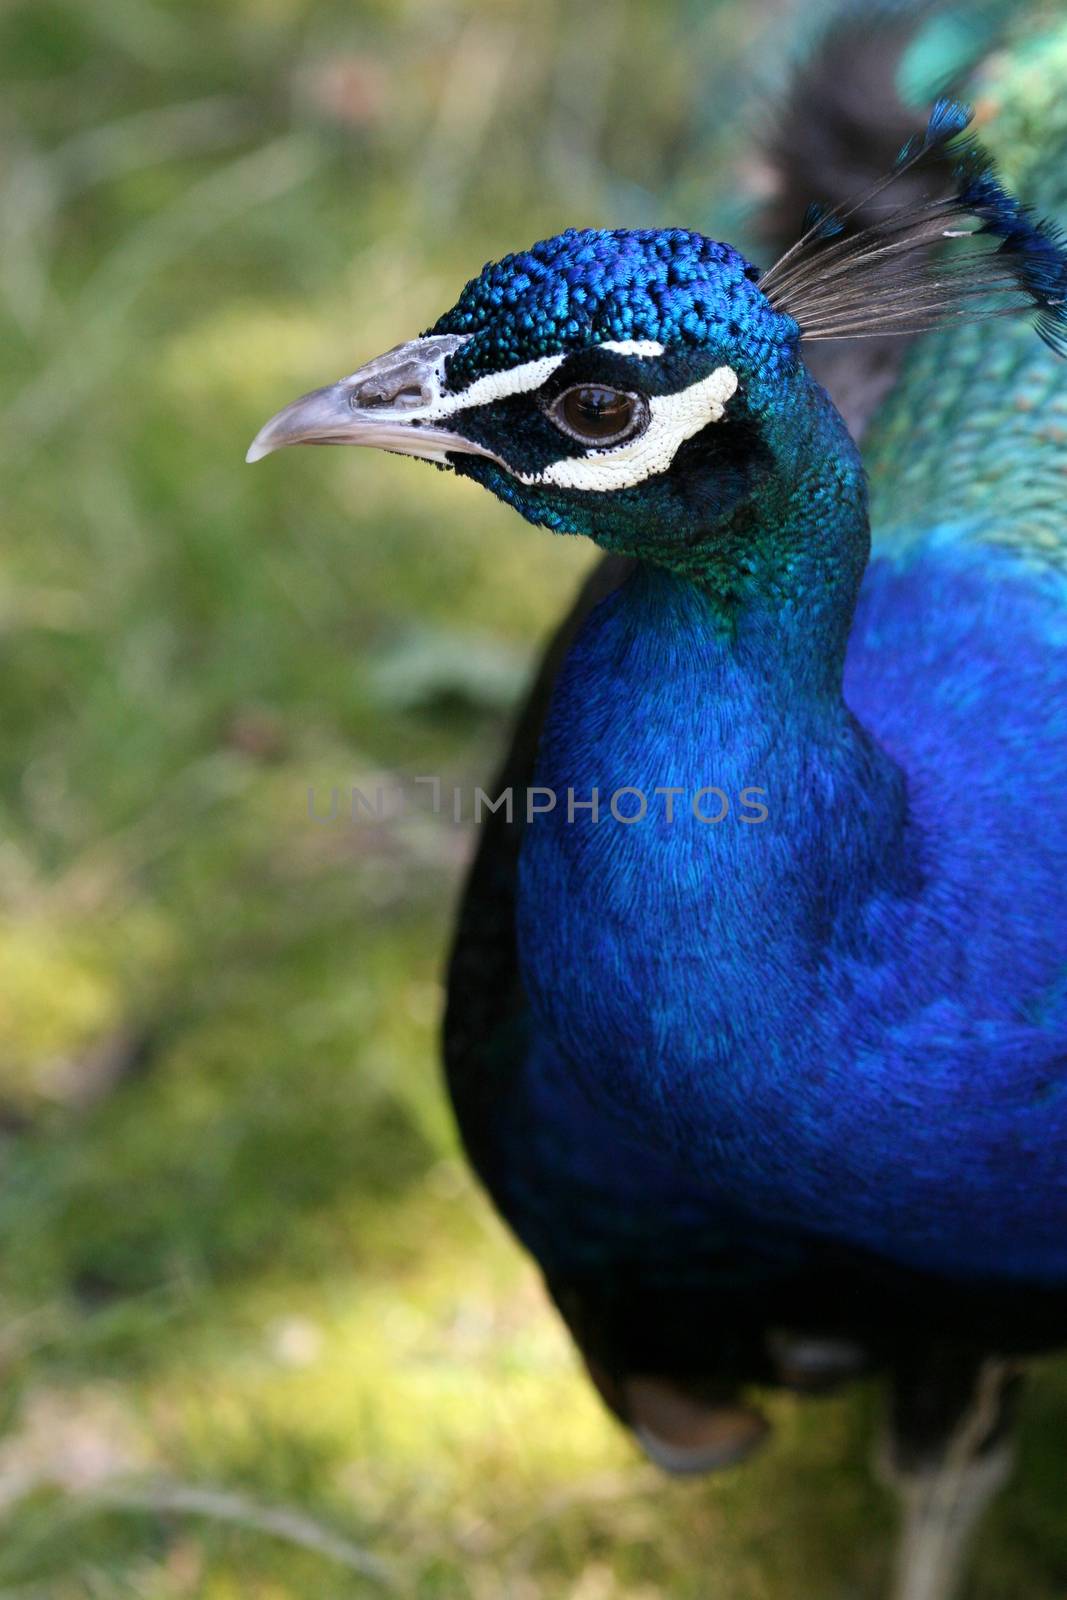 Peacock by Carratera